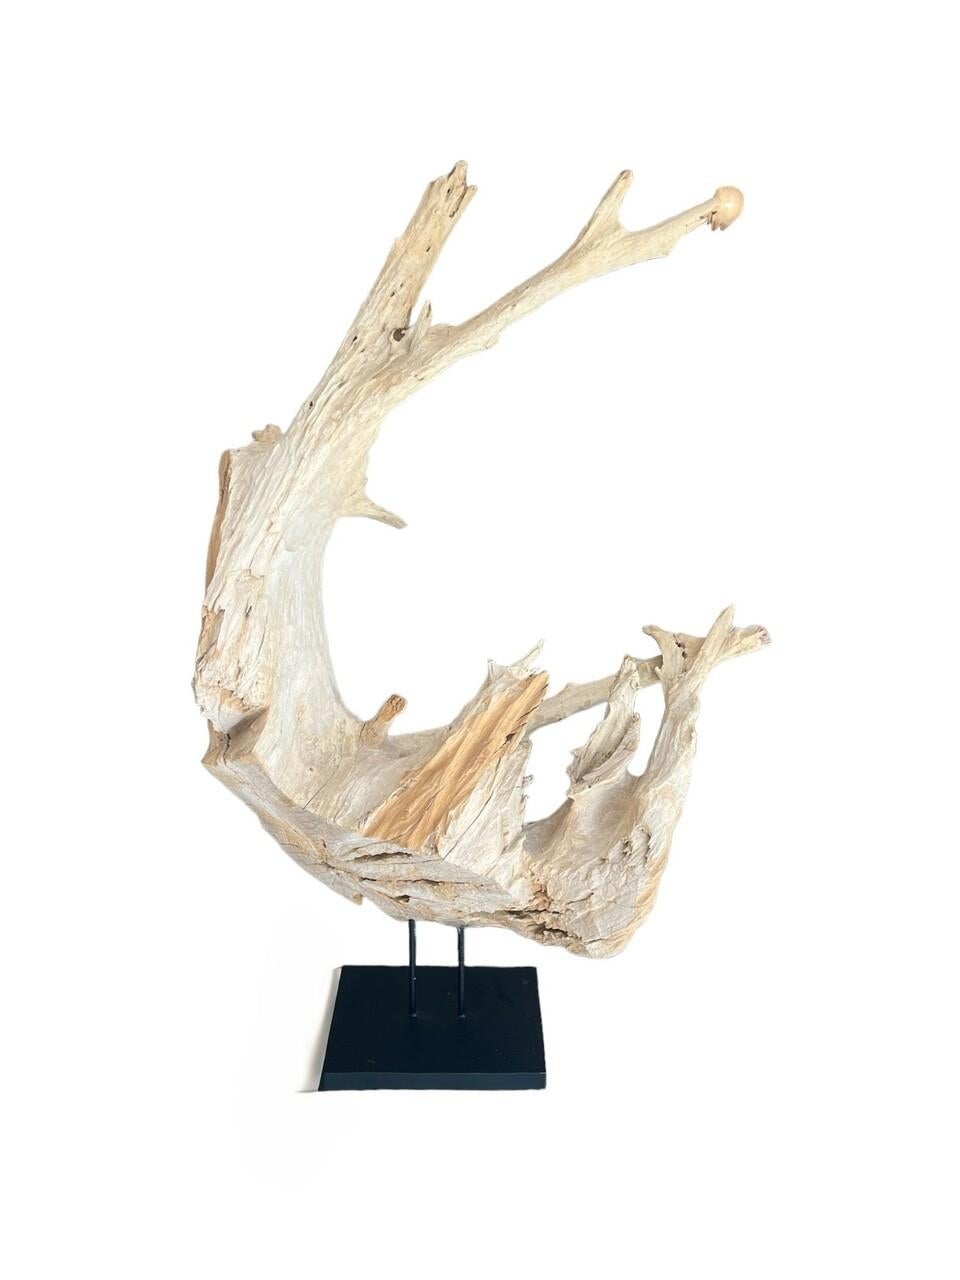 Adorn your space with striking contemporary flair! Standing at an impressive 46 inches tall, this modern abstract driftwood sculpture seamlessly blends organic elements with industrial chic. Crafted atop a sturdy concrete base wrapped in sleek